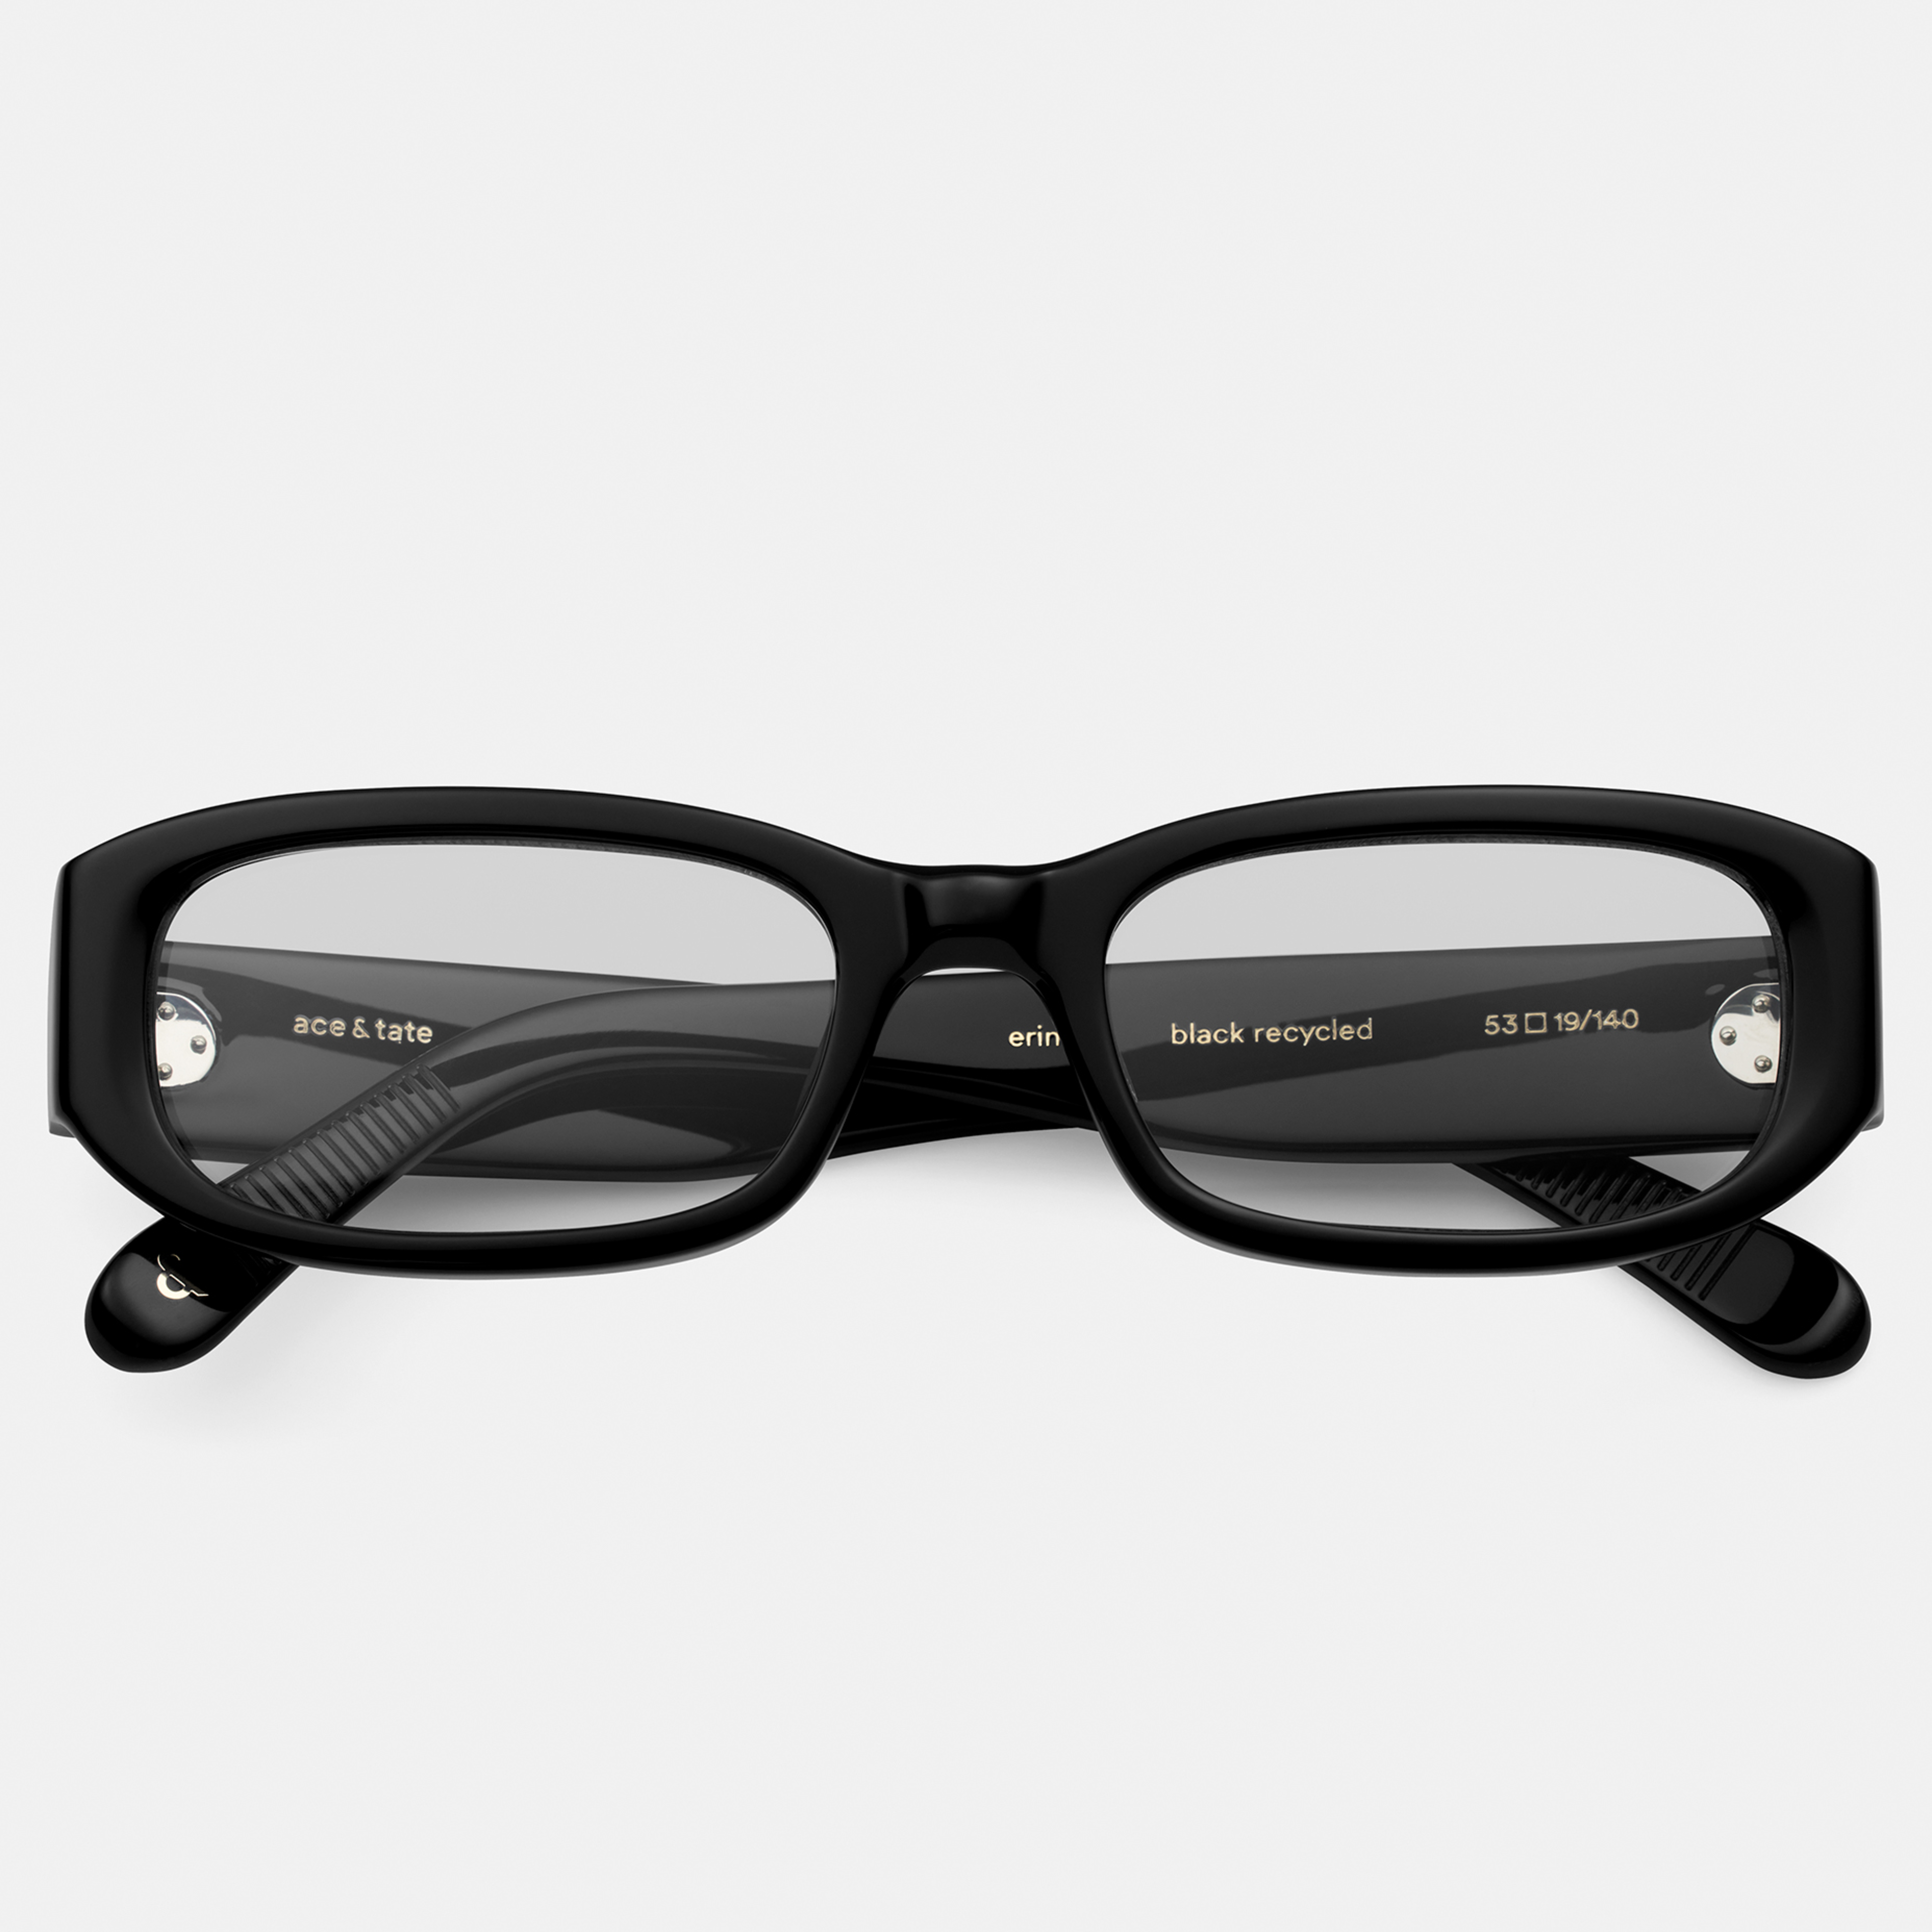 Ace & Tate Glasses | rectangle Recycled in Black